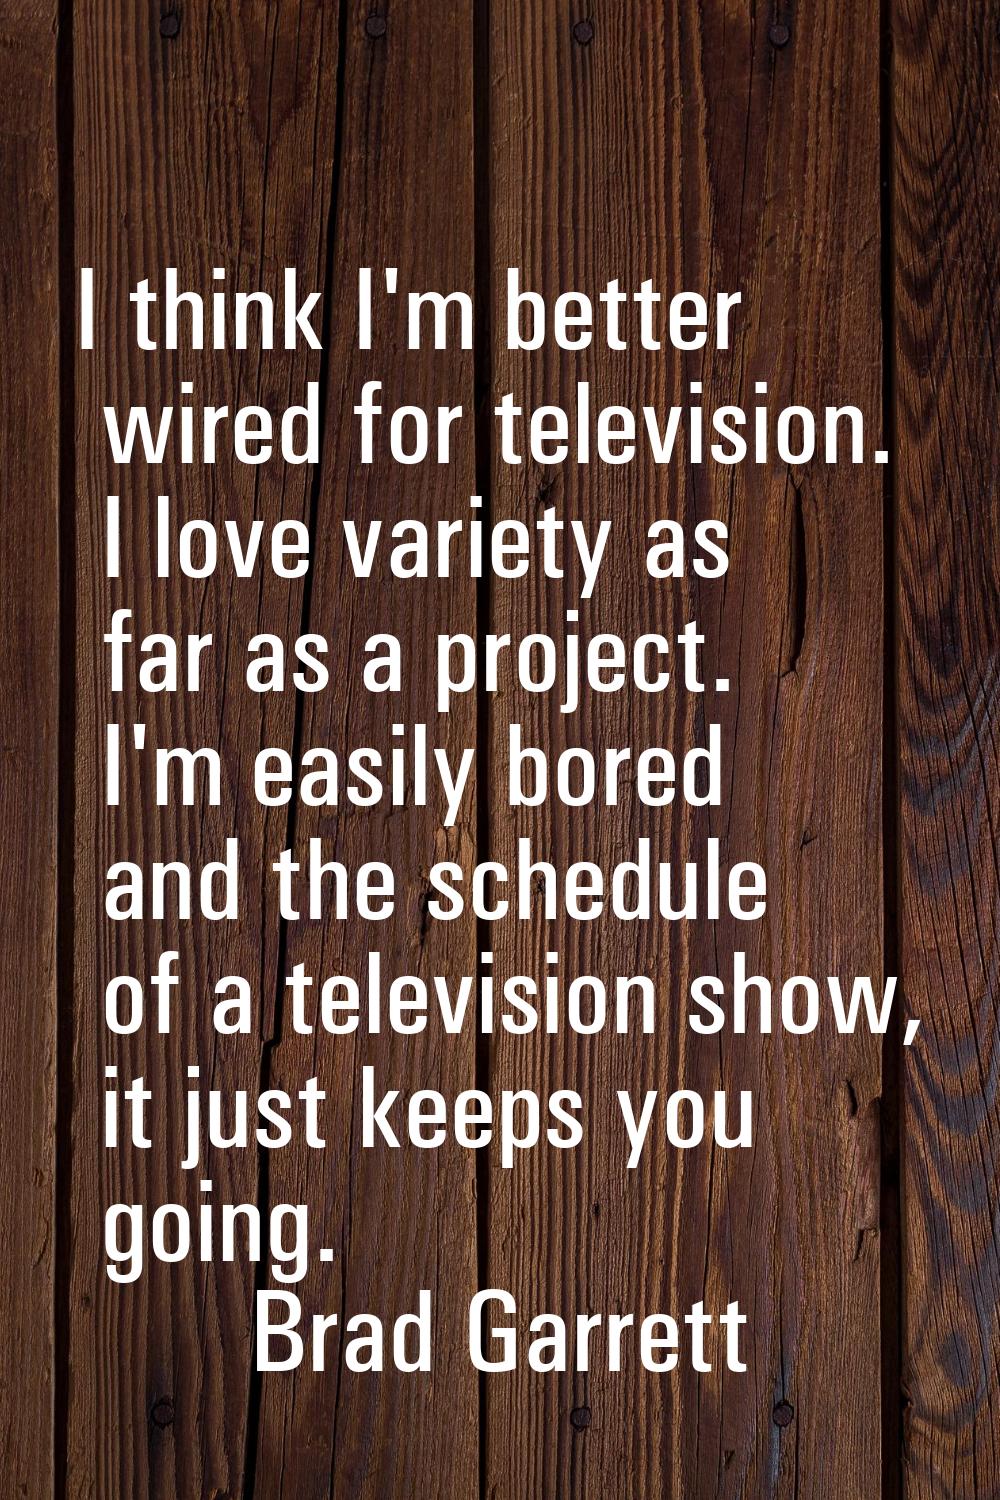 I think I'm better wired for television. I love variety as far as a project. I'm easily bored and t